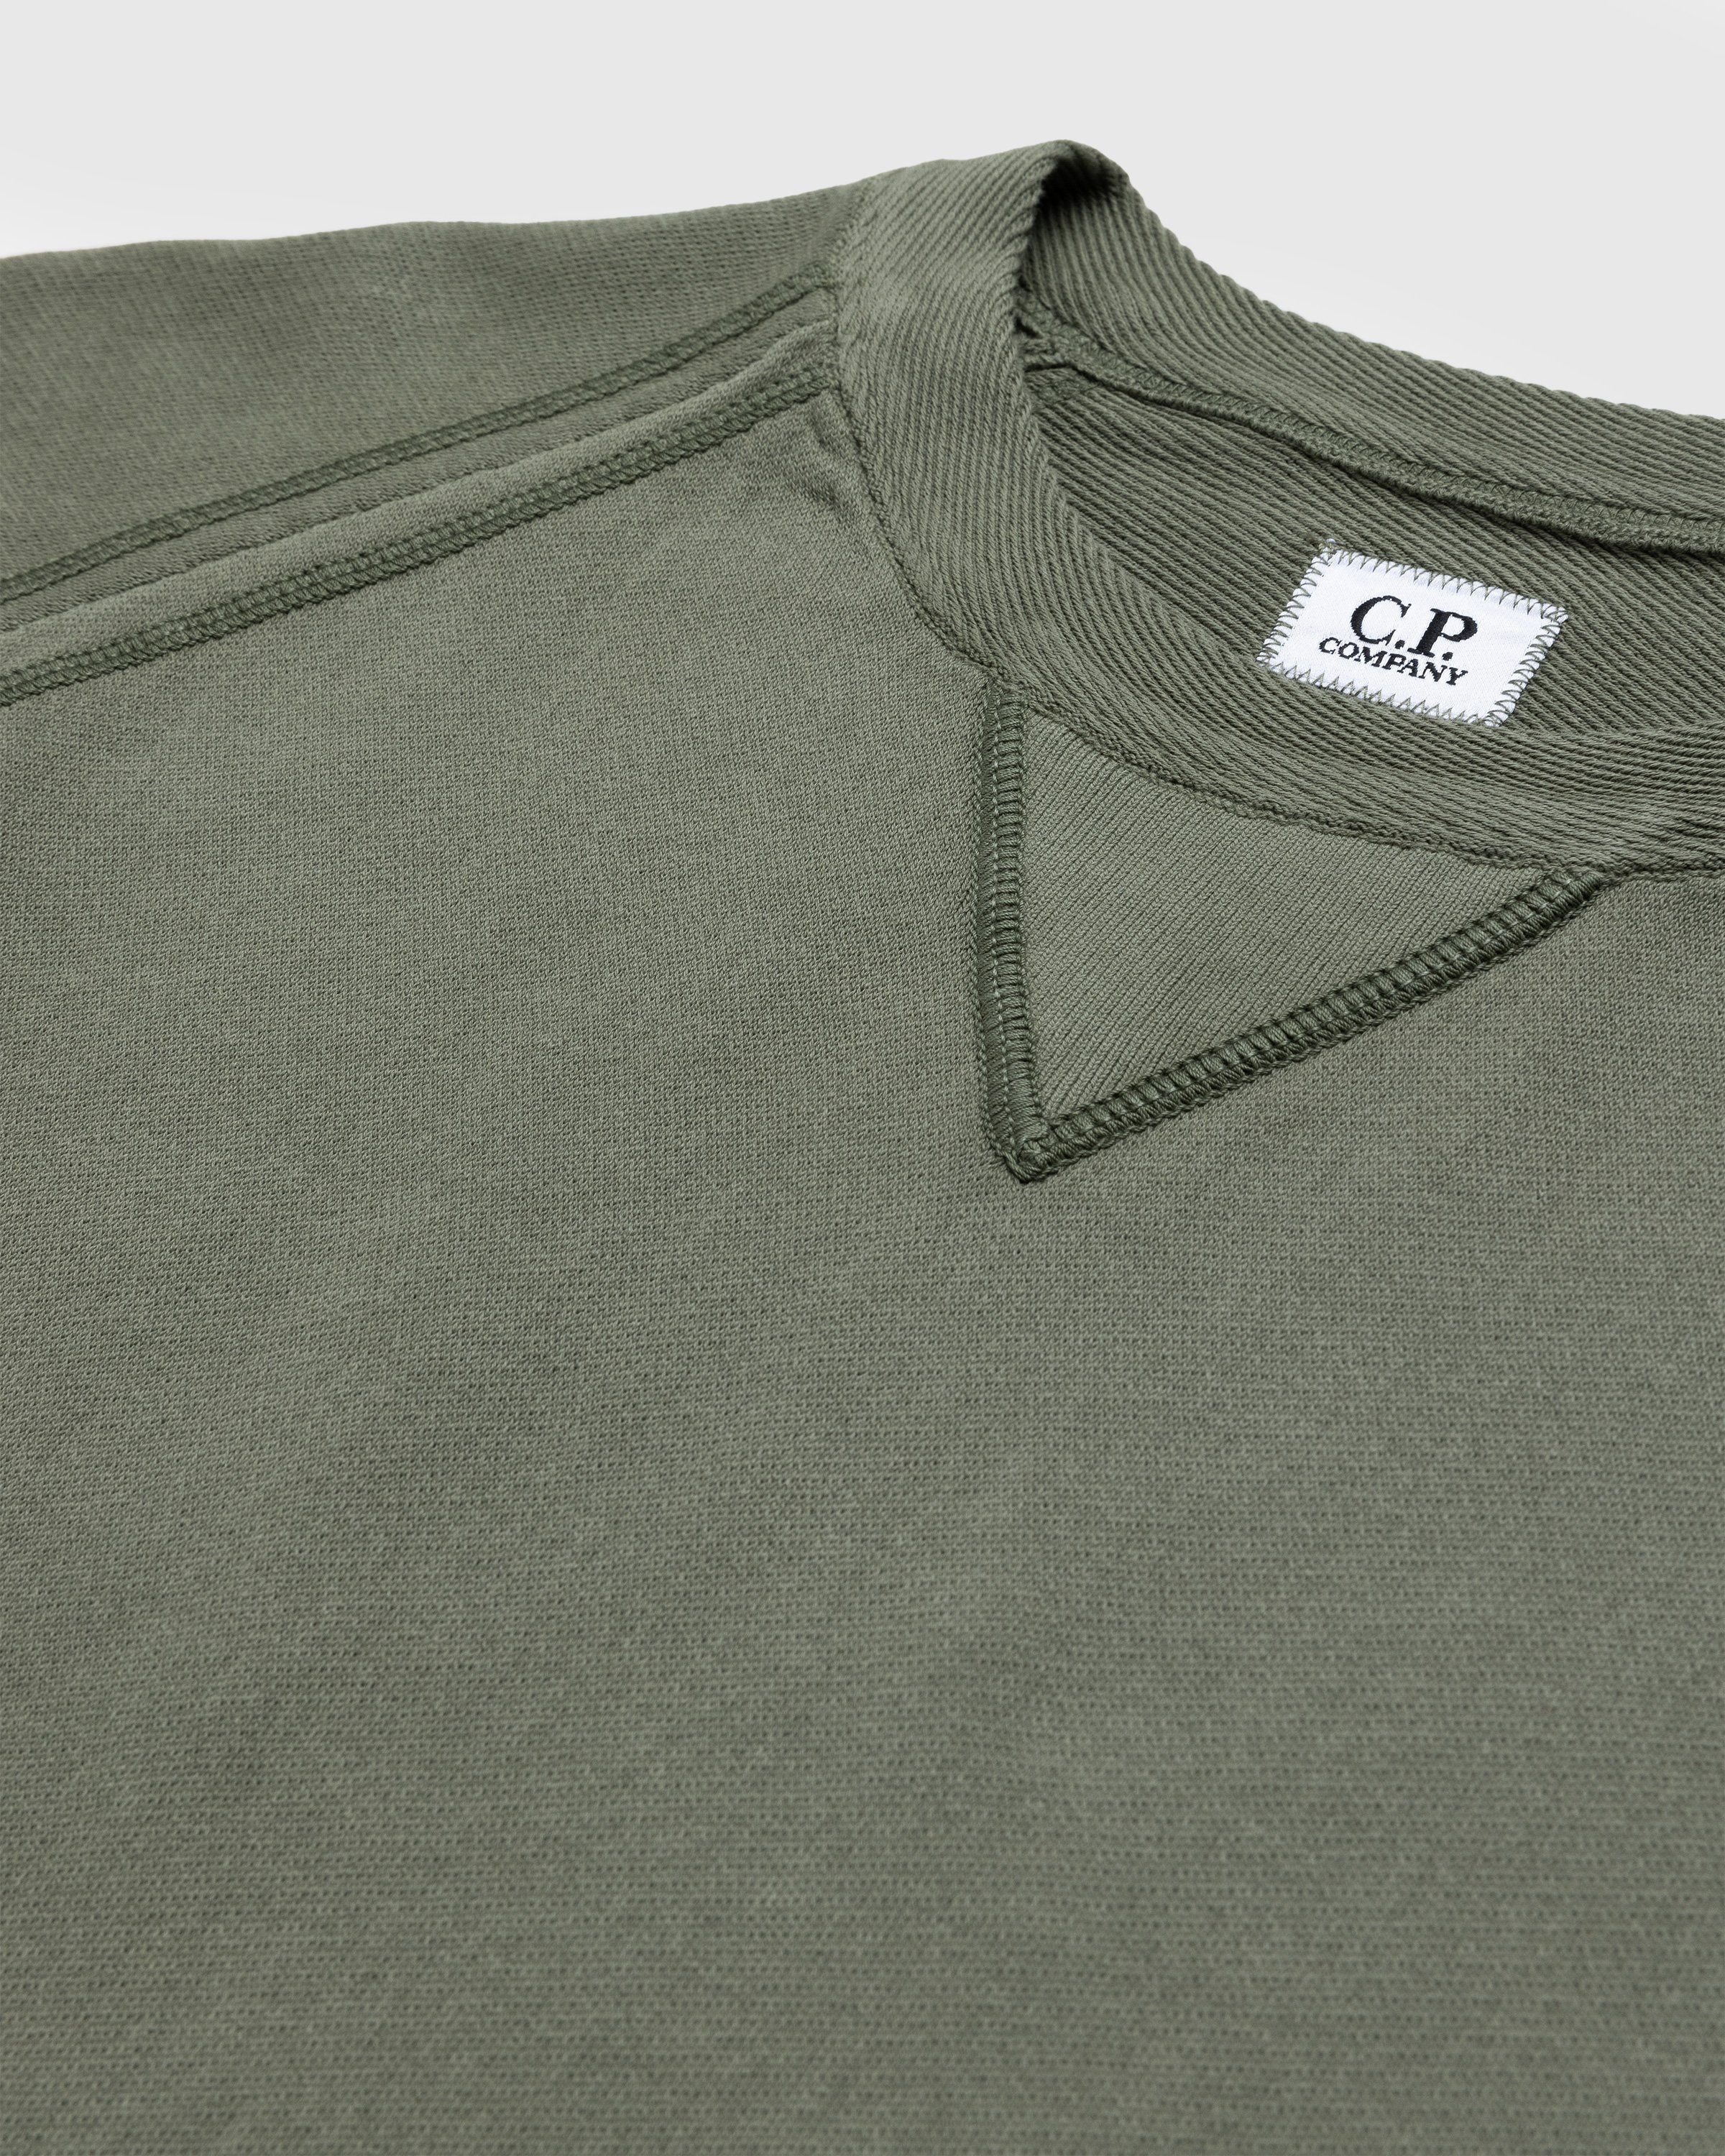 C.P. Company - Light Terry Knitted Sweatshirt Bronze Green - Clothing - Green - Image 4